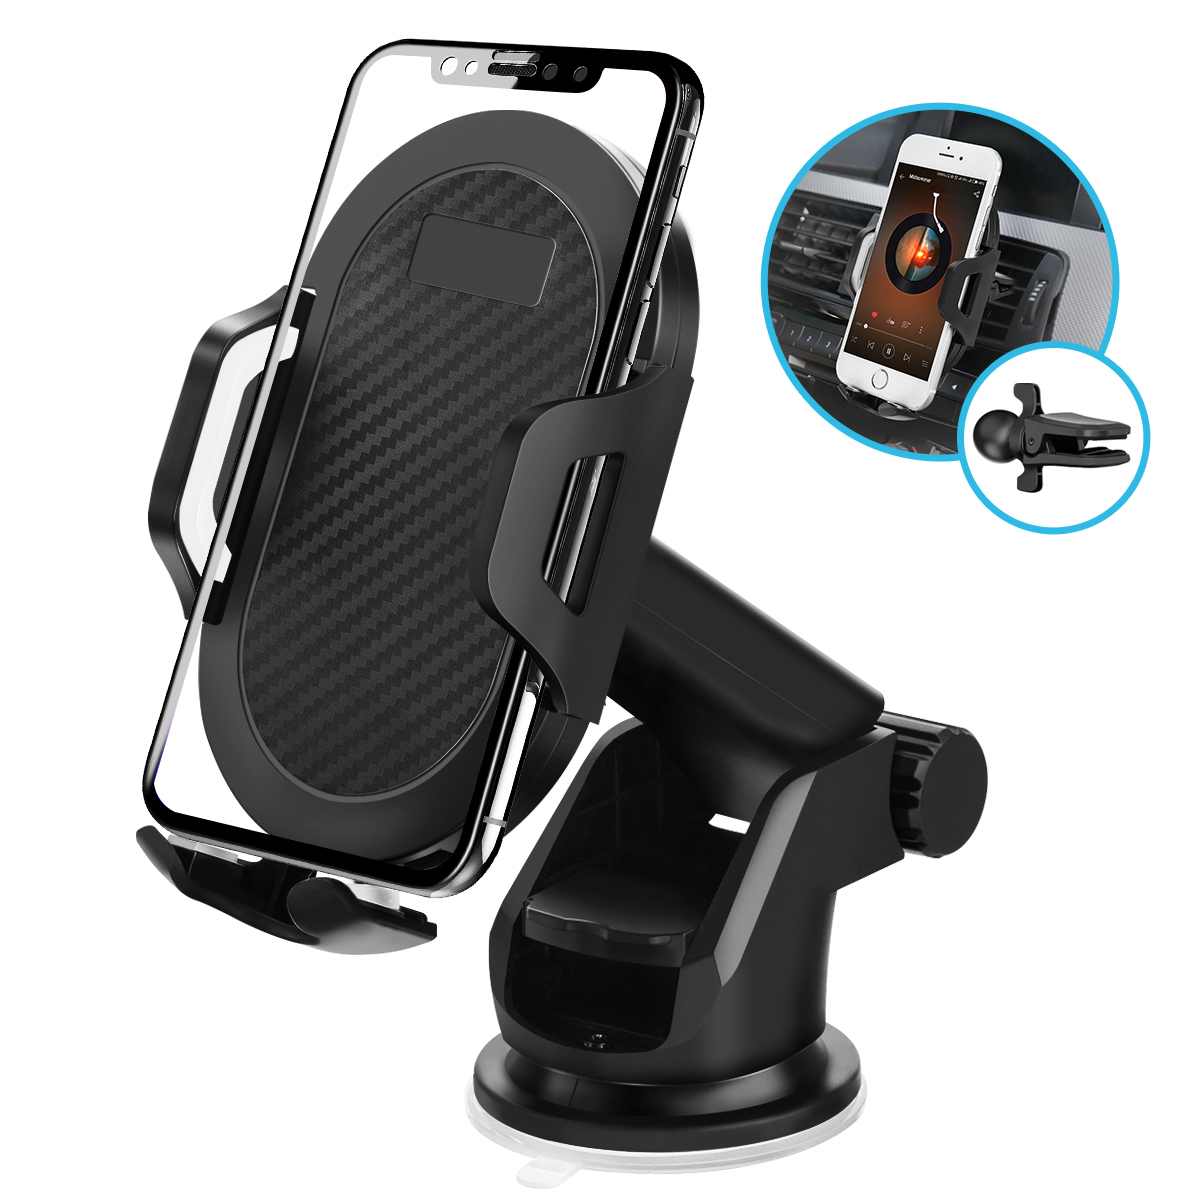 

ELEGIANT 2 In 1 Car Air Vent Dashboard Suction Cup Car Phone Holder For 4.0 Inch - 6.5 Inch Smart Phone iPhone XS Max Samsung Galaxy S10 Plus